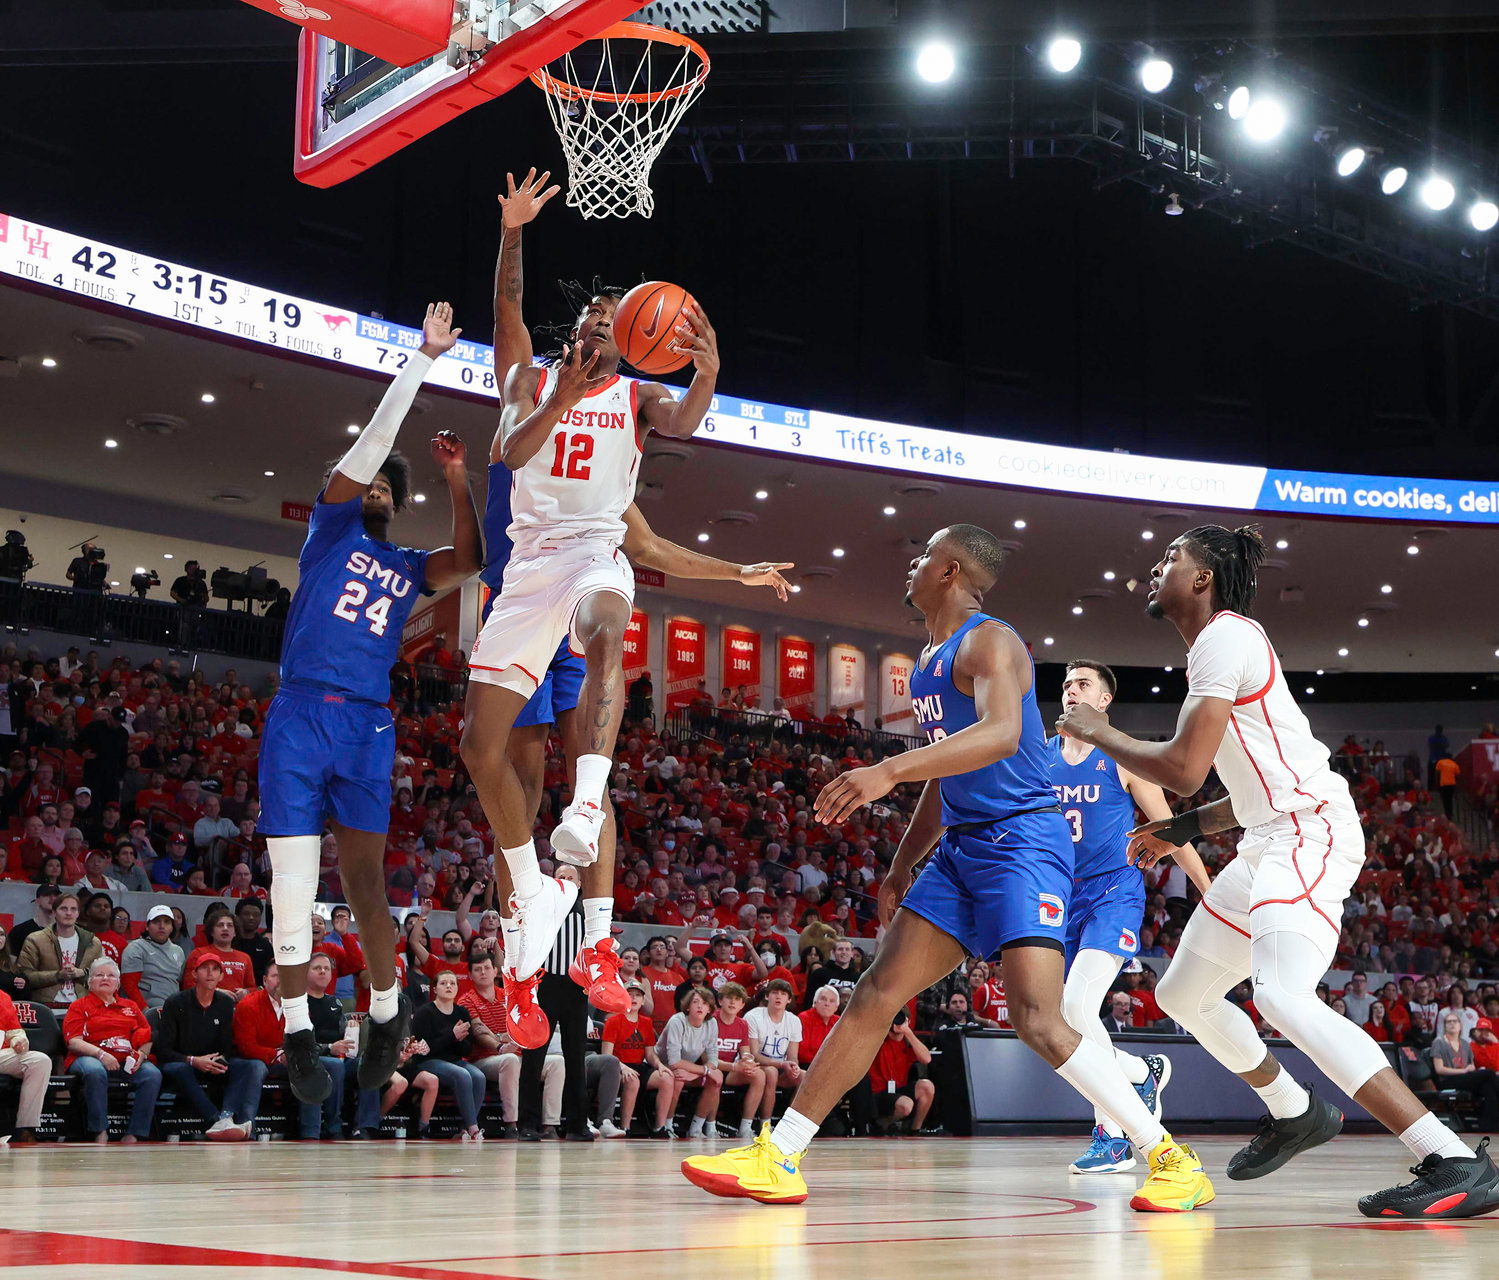 Houston guard Tramon Mark (12) goes to the basket during an NCAA men’s basketball game between the Houston Cougars and the Southern Methodist Mustangs on Jan. 5, 2023 in Houston. Houston won, 87-53,